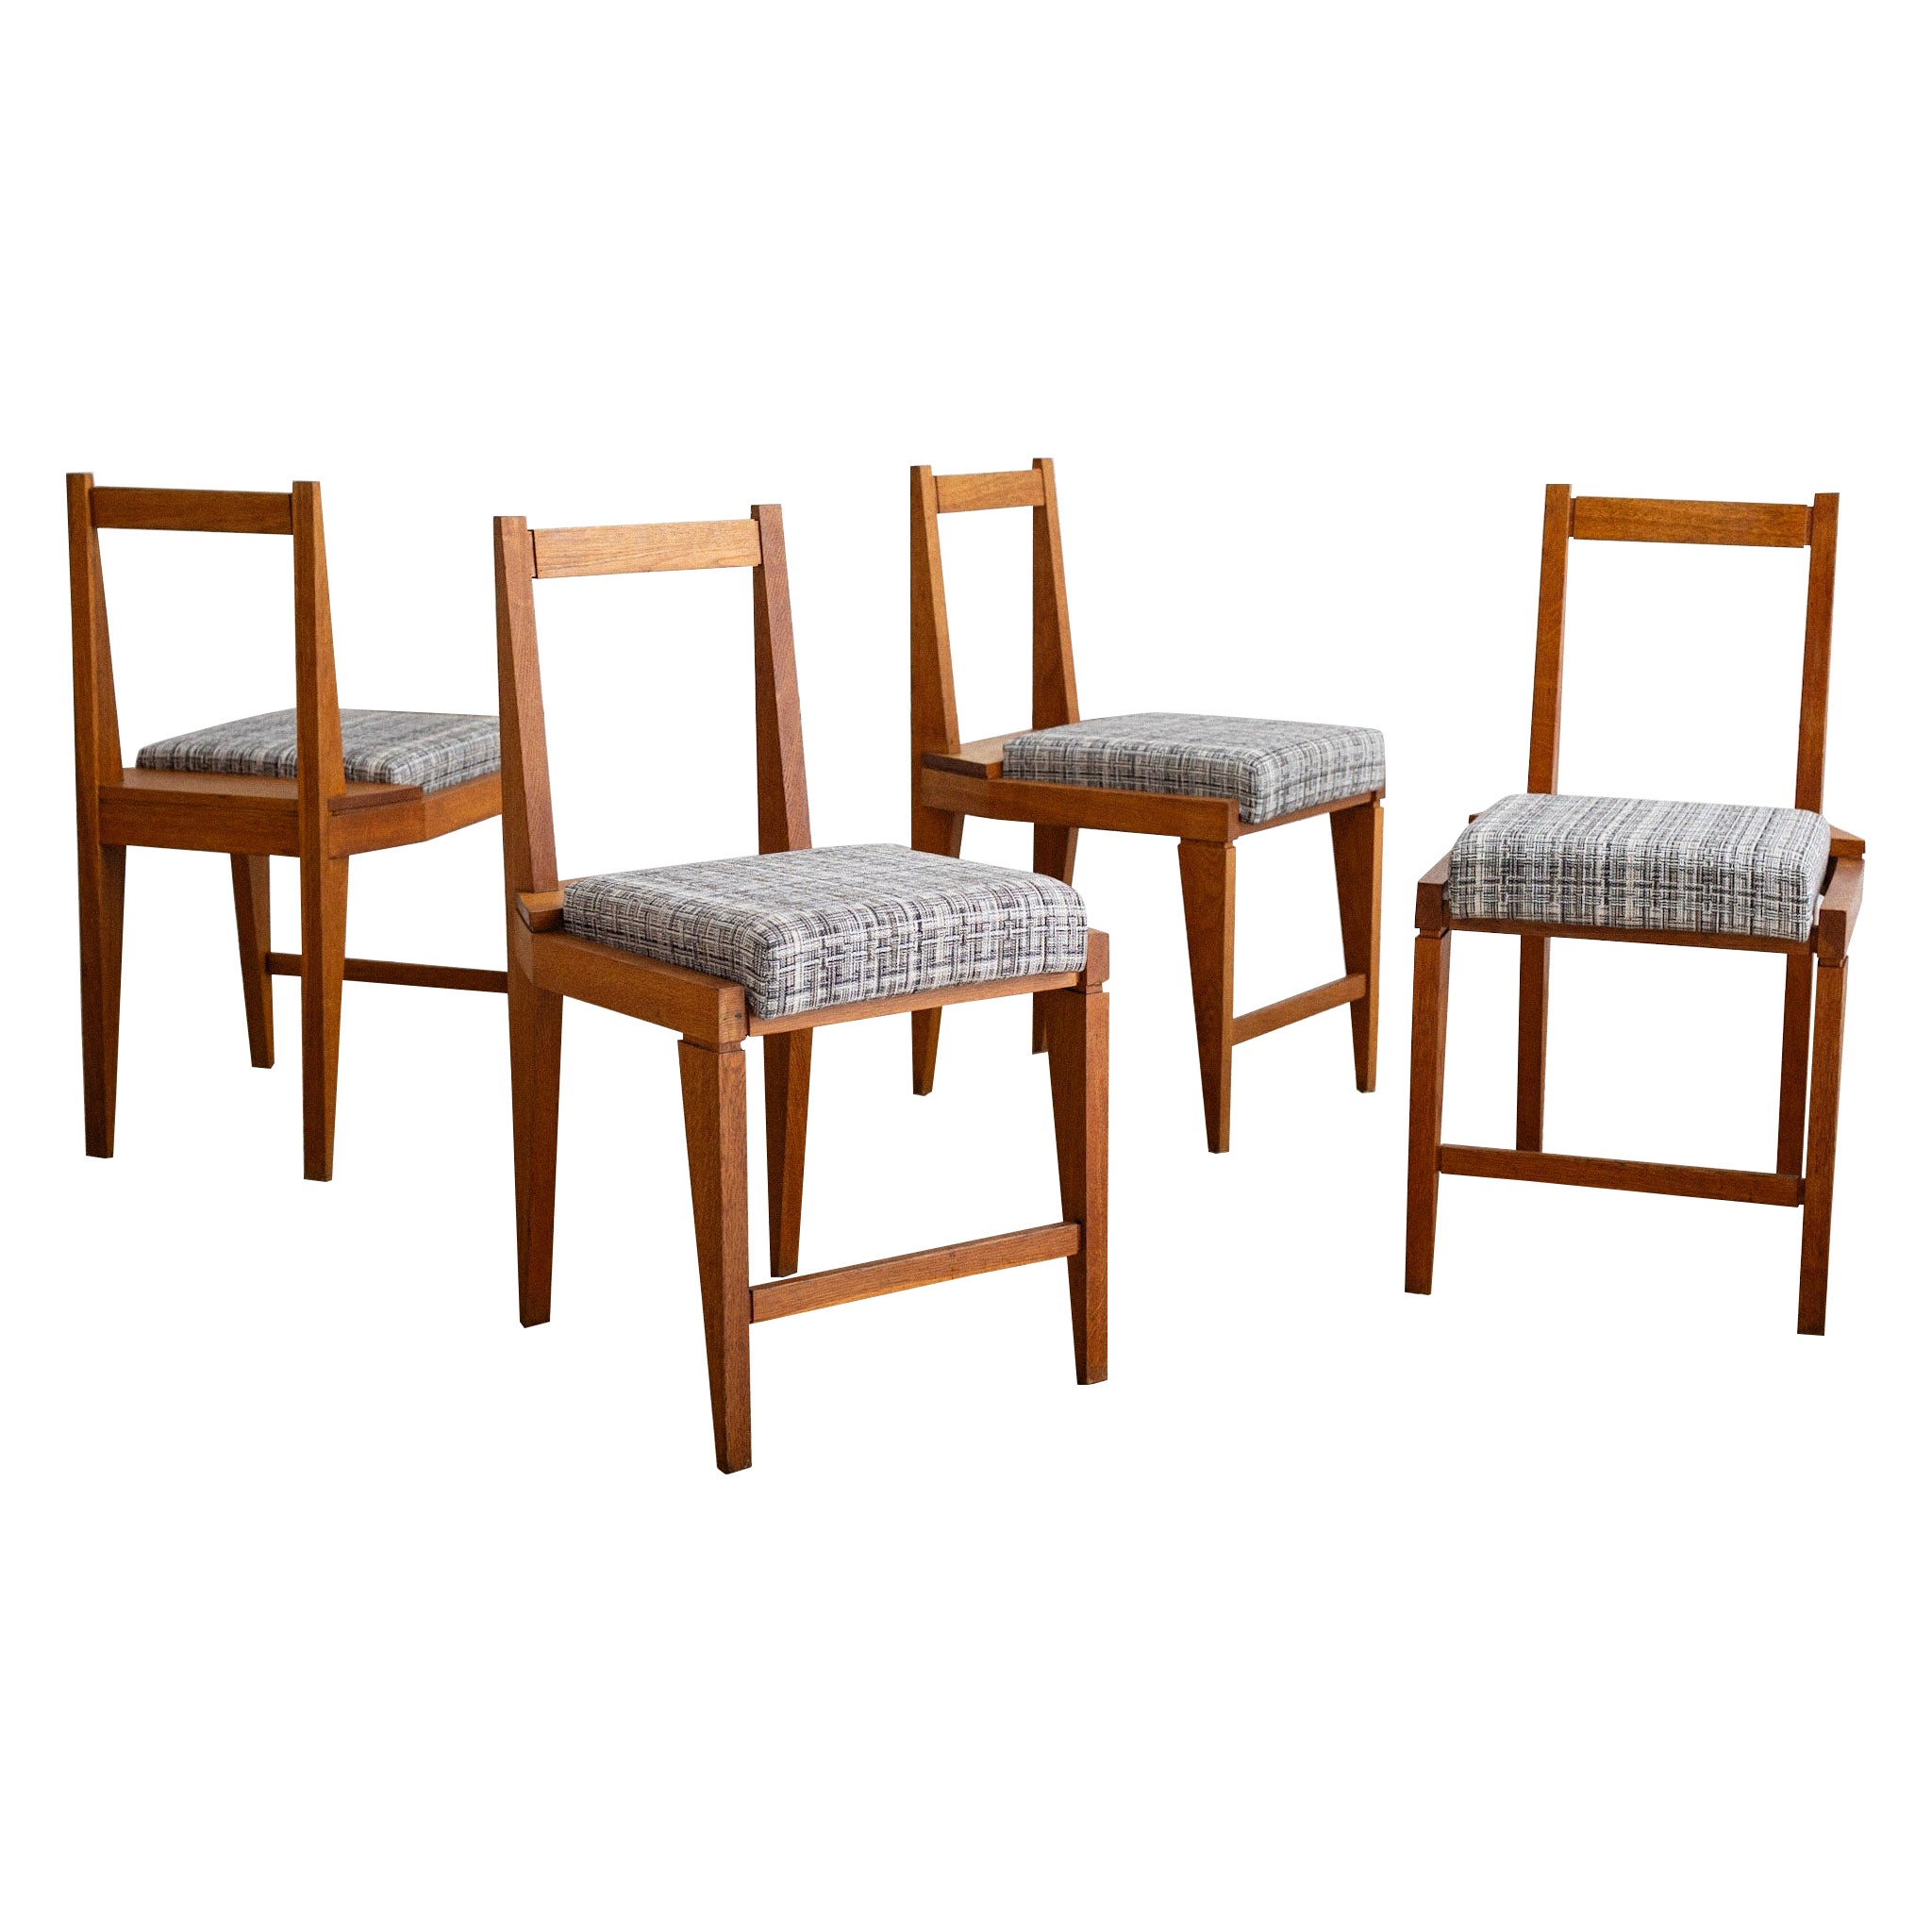 Italian Solid Wood Dining Chairs - a Set of 4